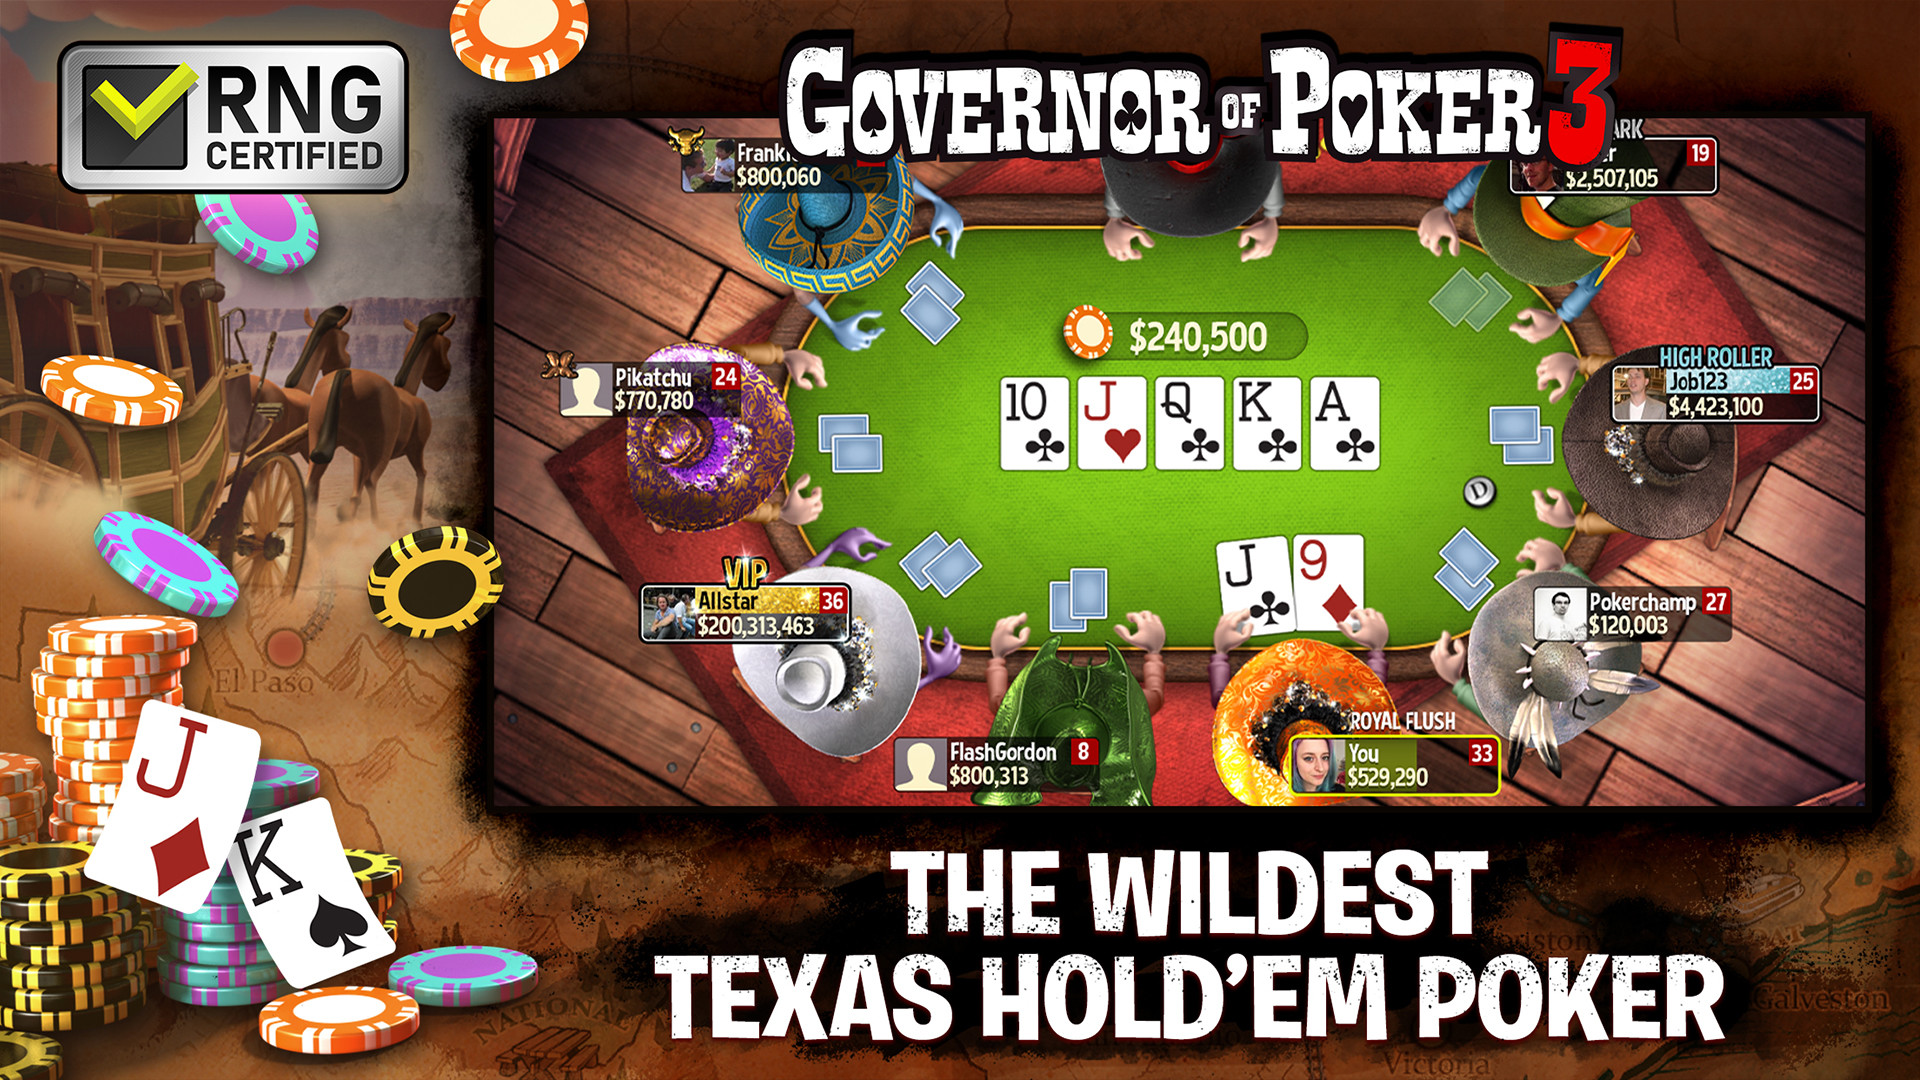 why does governor of poker 3 not load on facebook